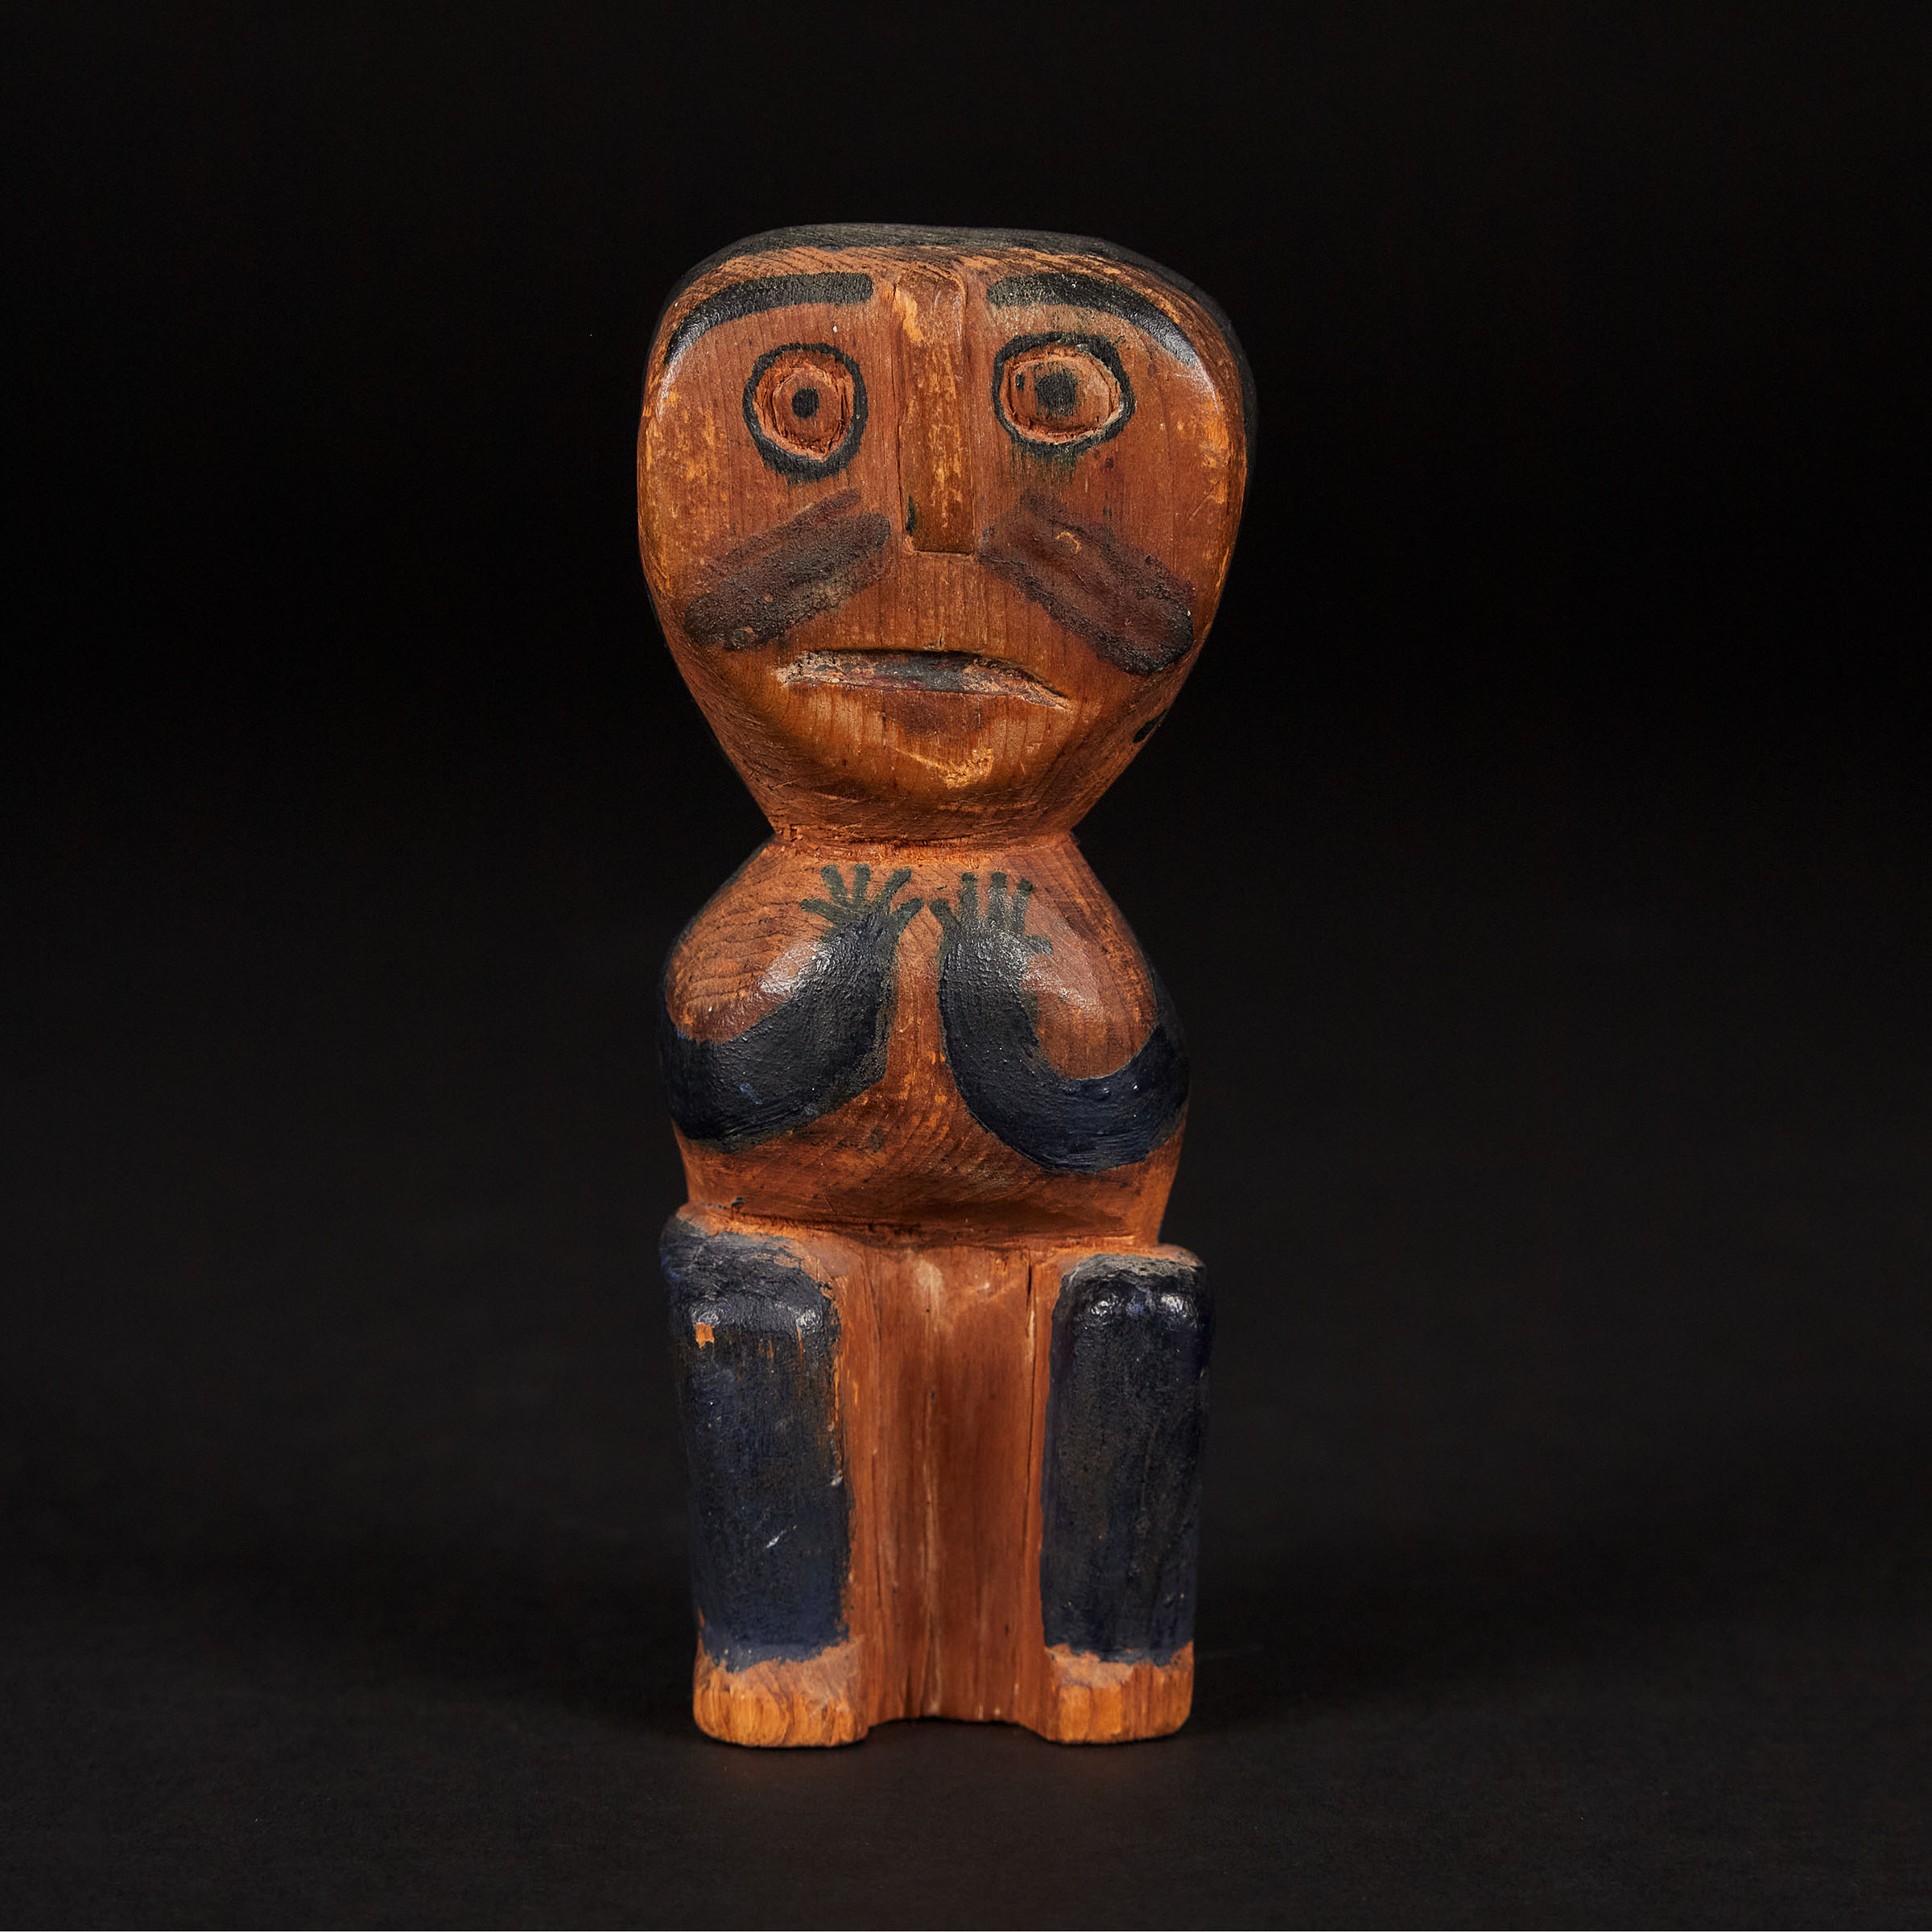 Unidentified Artist Nuu chah nulth 30a437